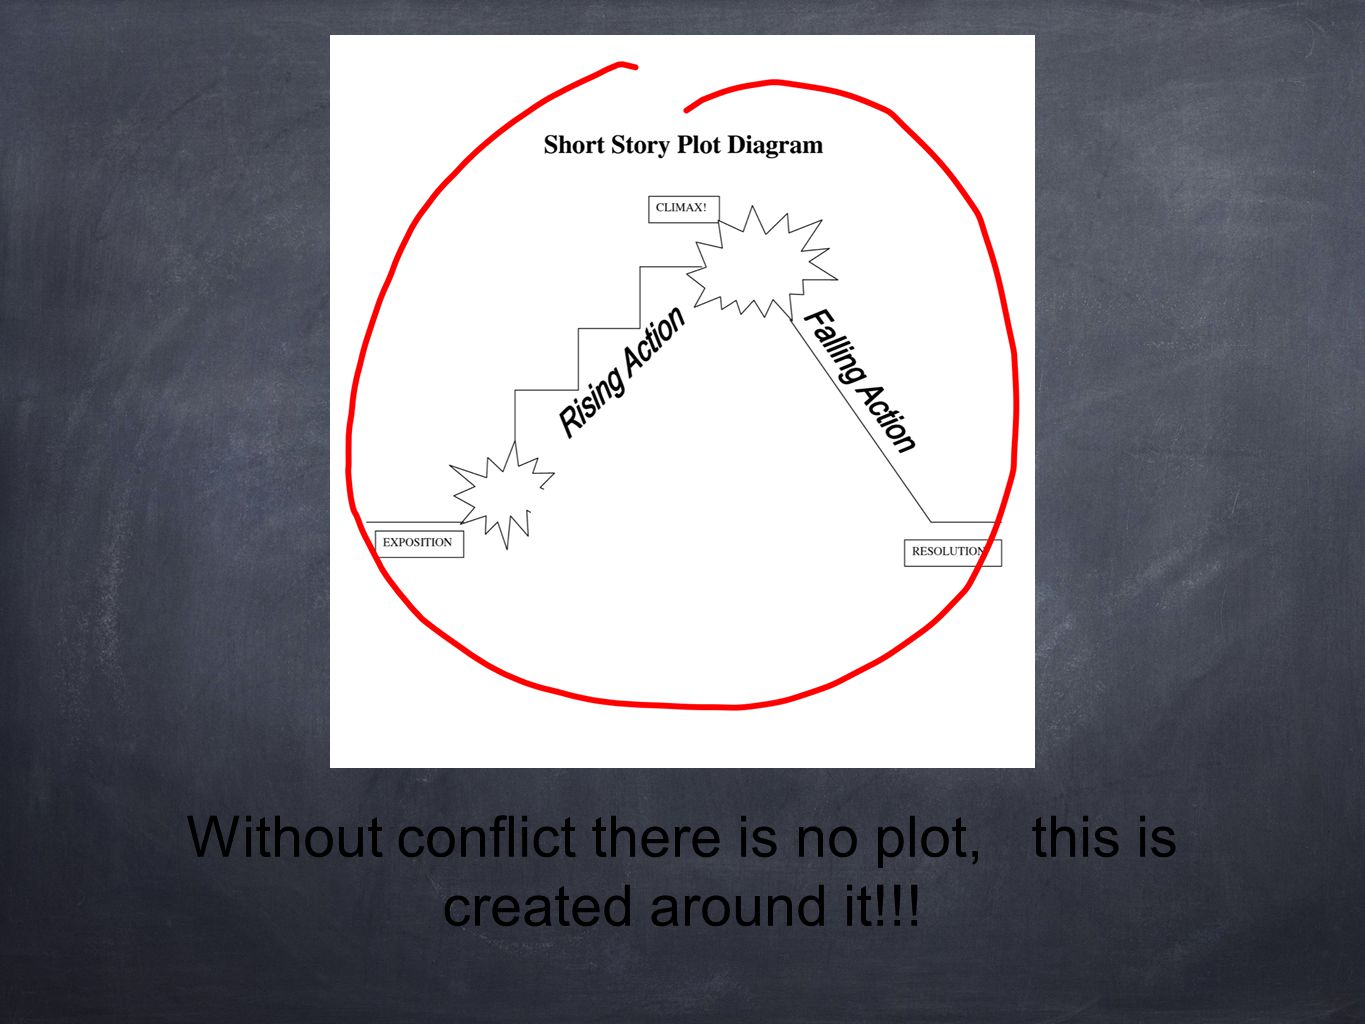 Without conflict there is no plot, this is created around it!!!